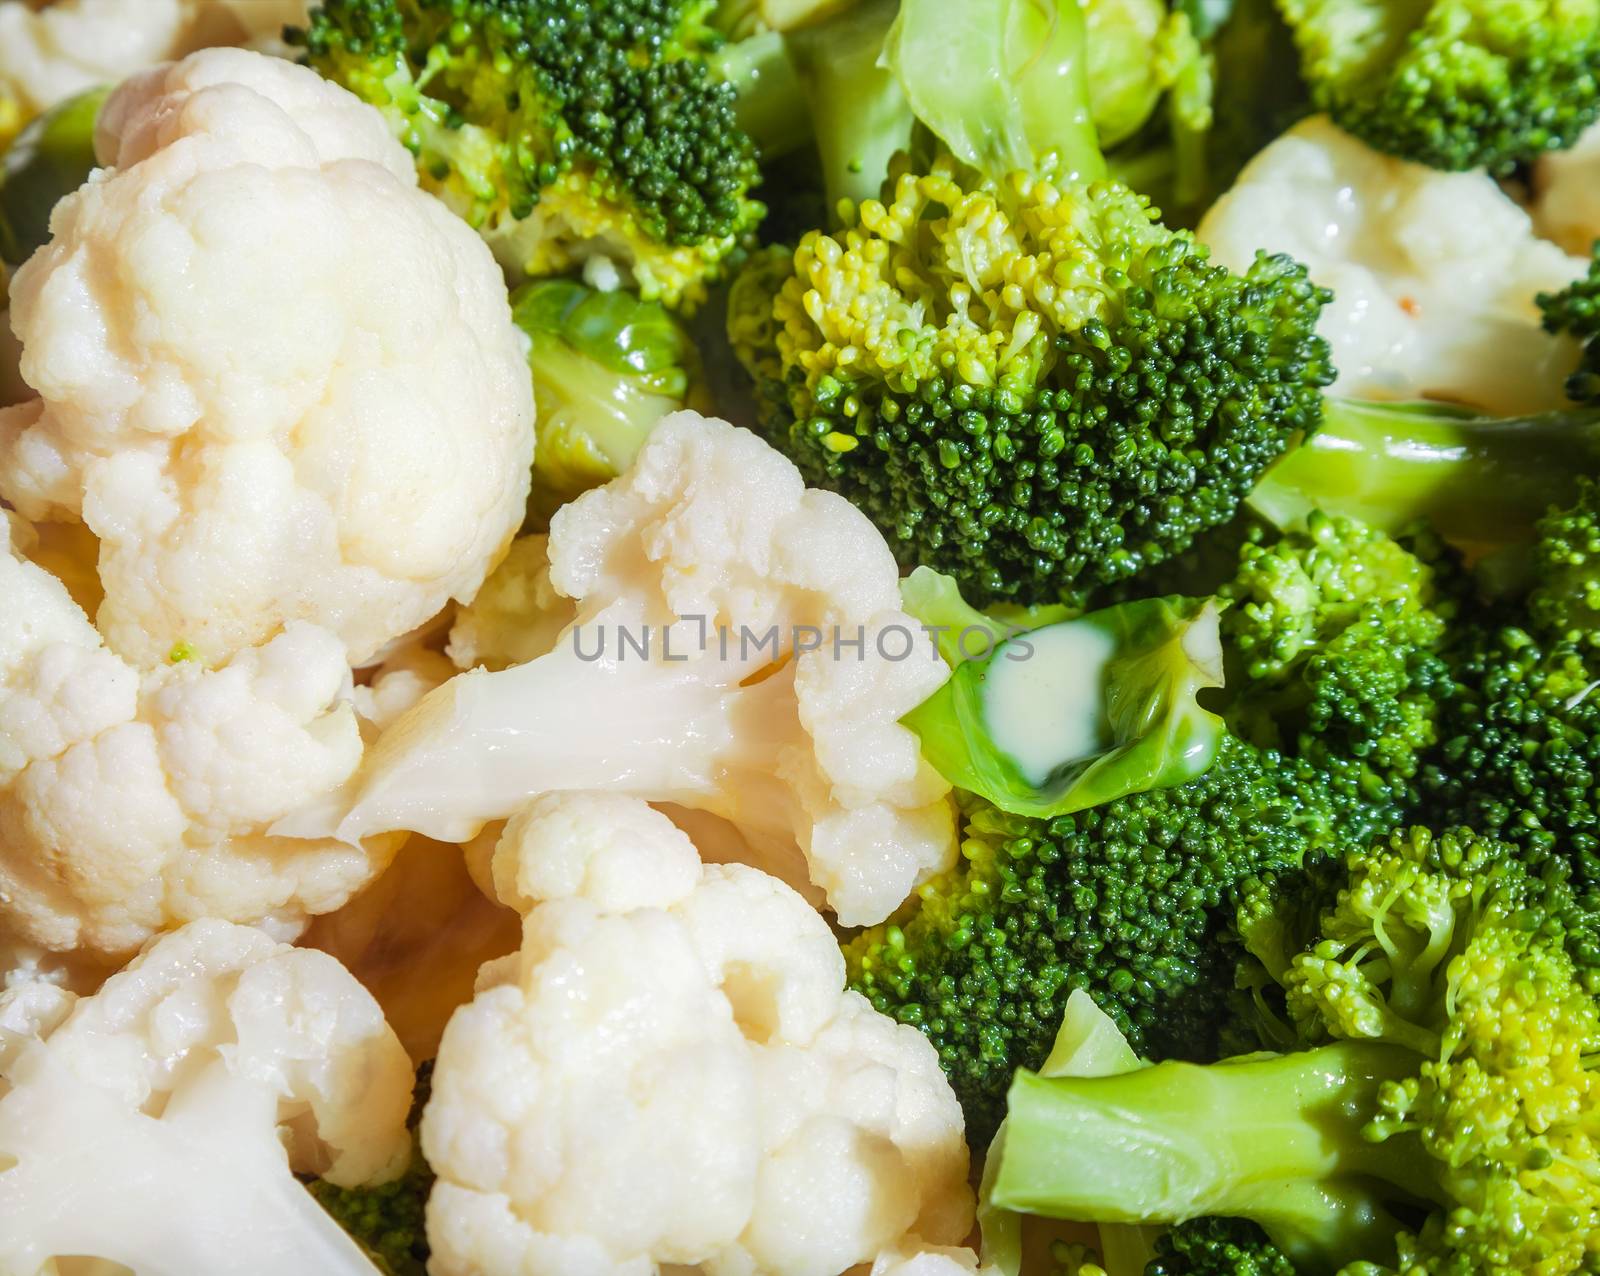 cooking broccoli, diet healthy food, close-up